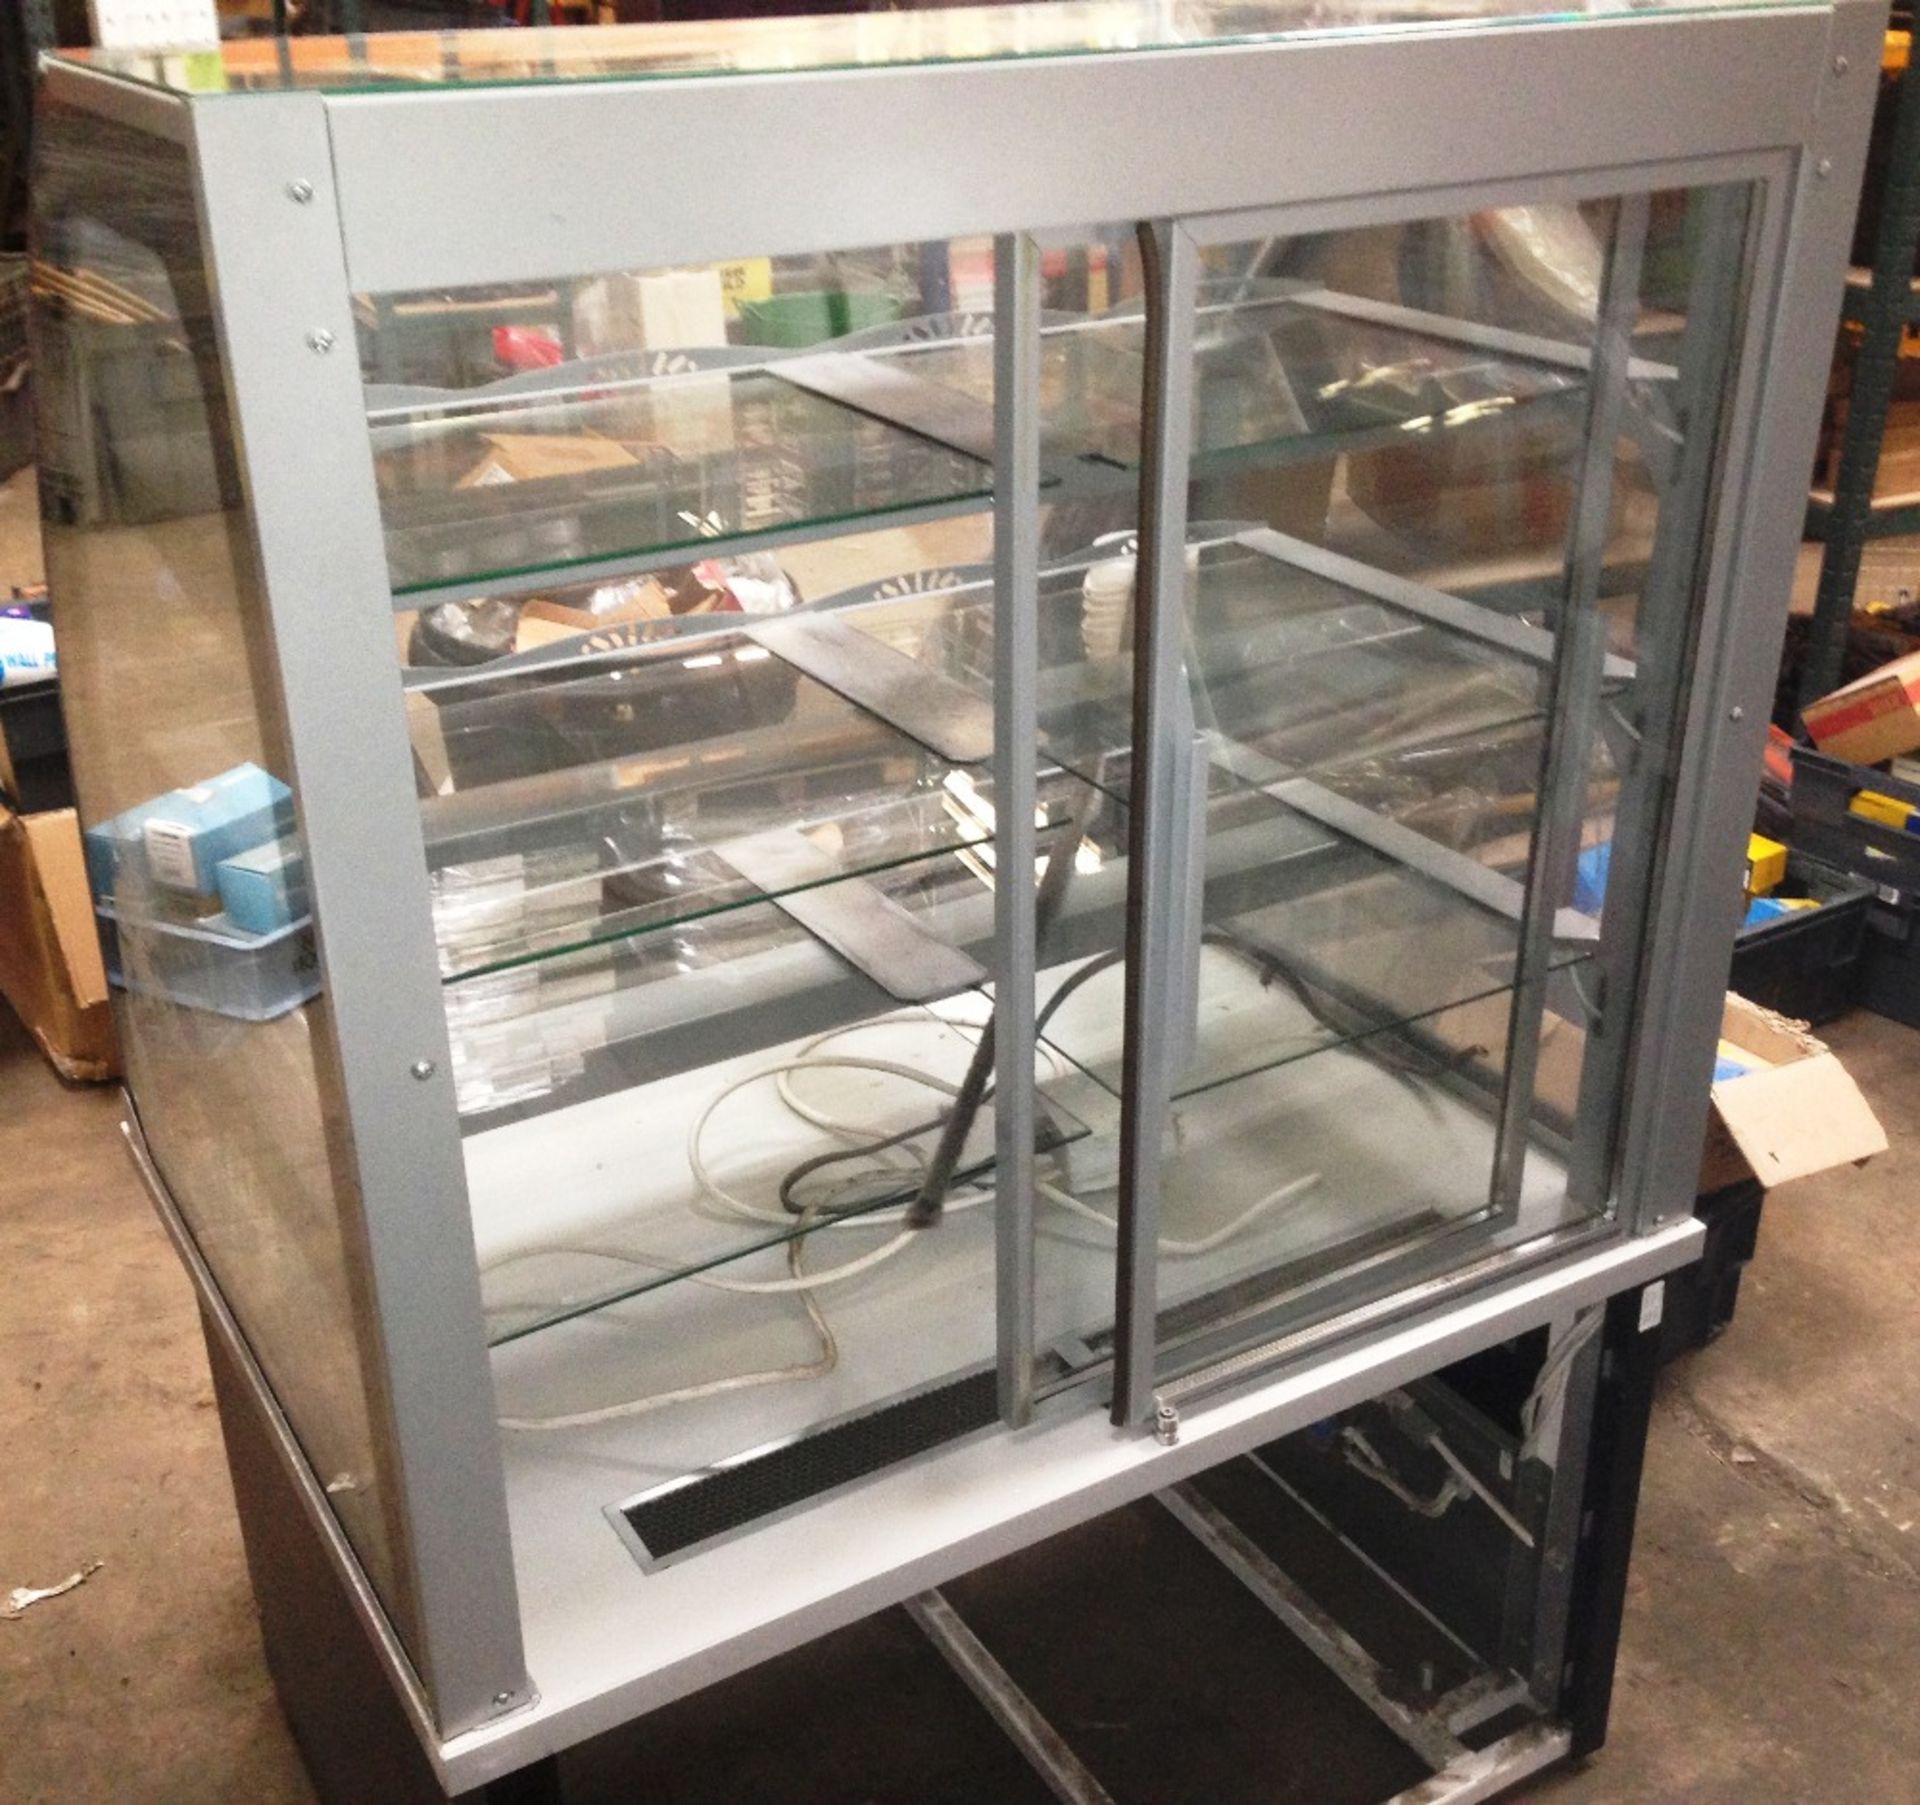 Nuttall 94cm Refrigerated serve over display counter - internal glass shelves and light - Image 2 of 3